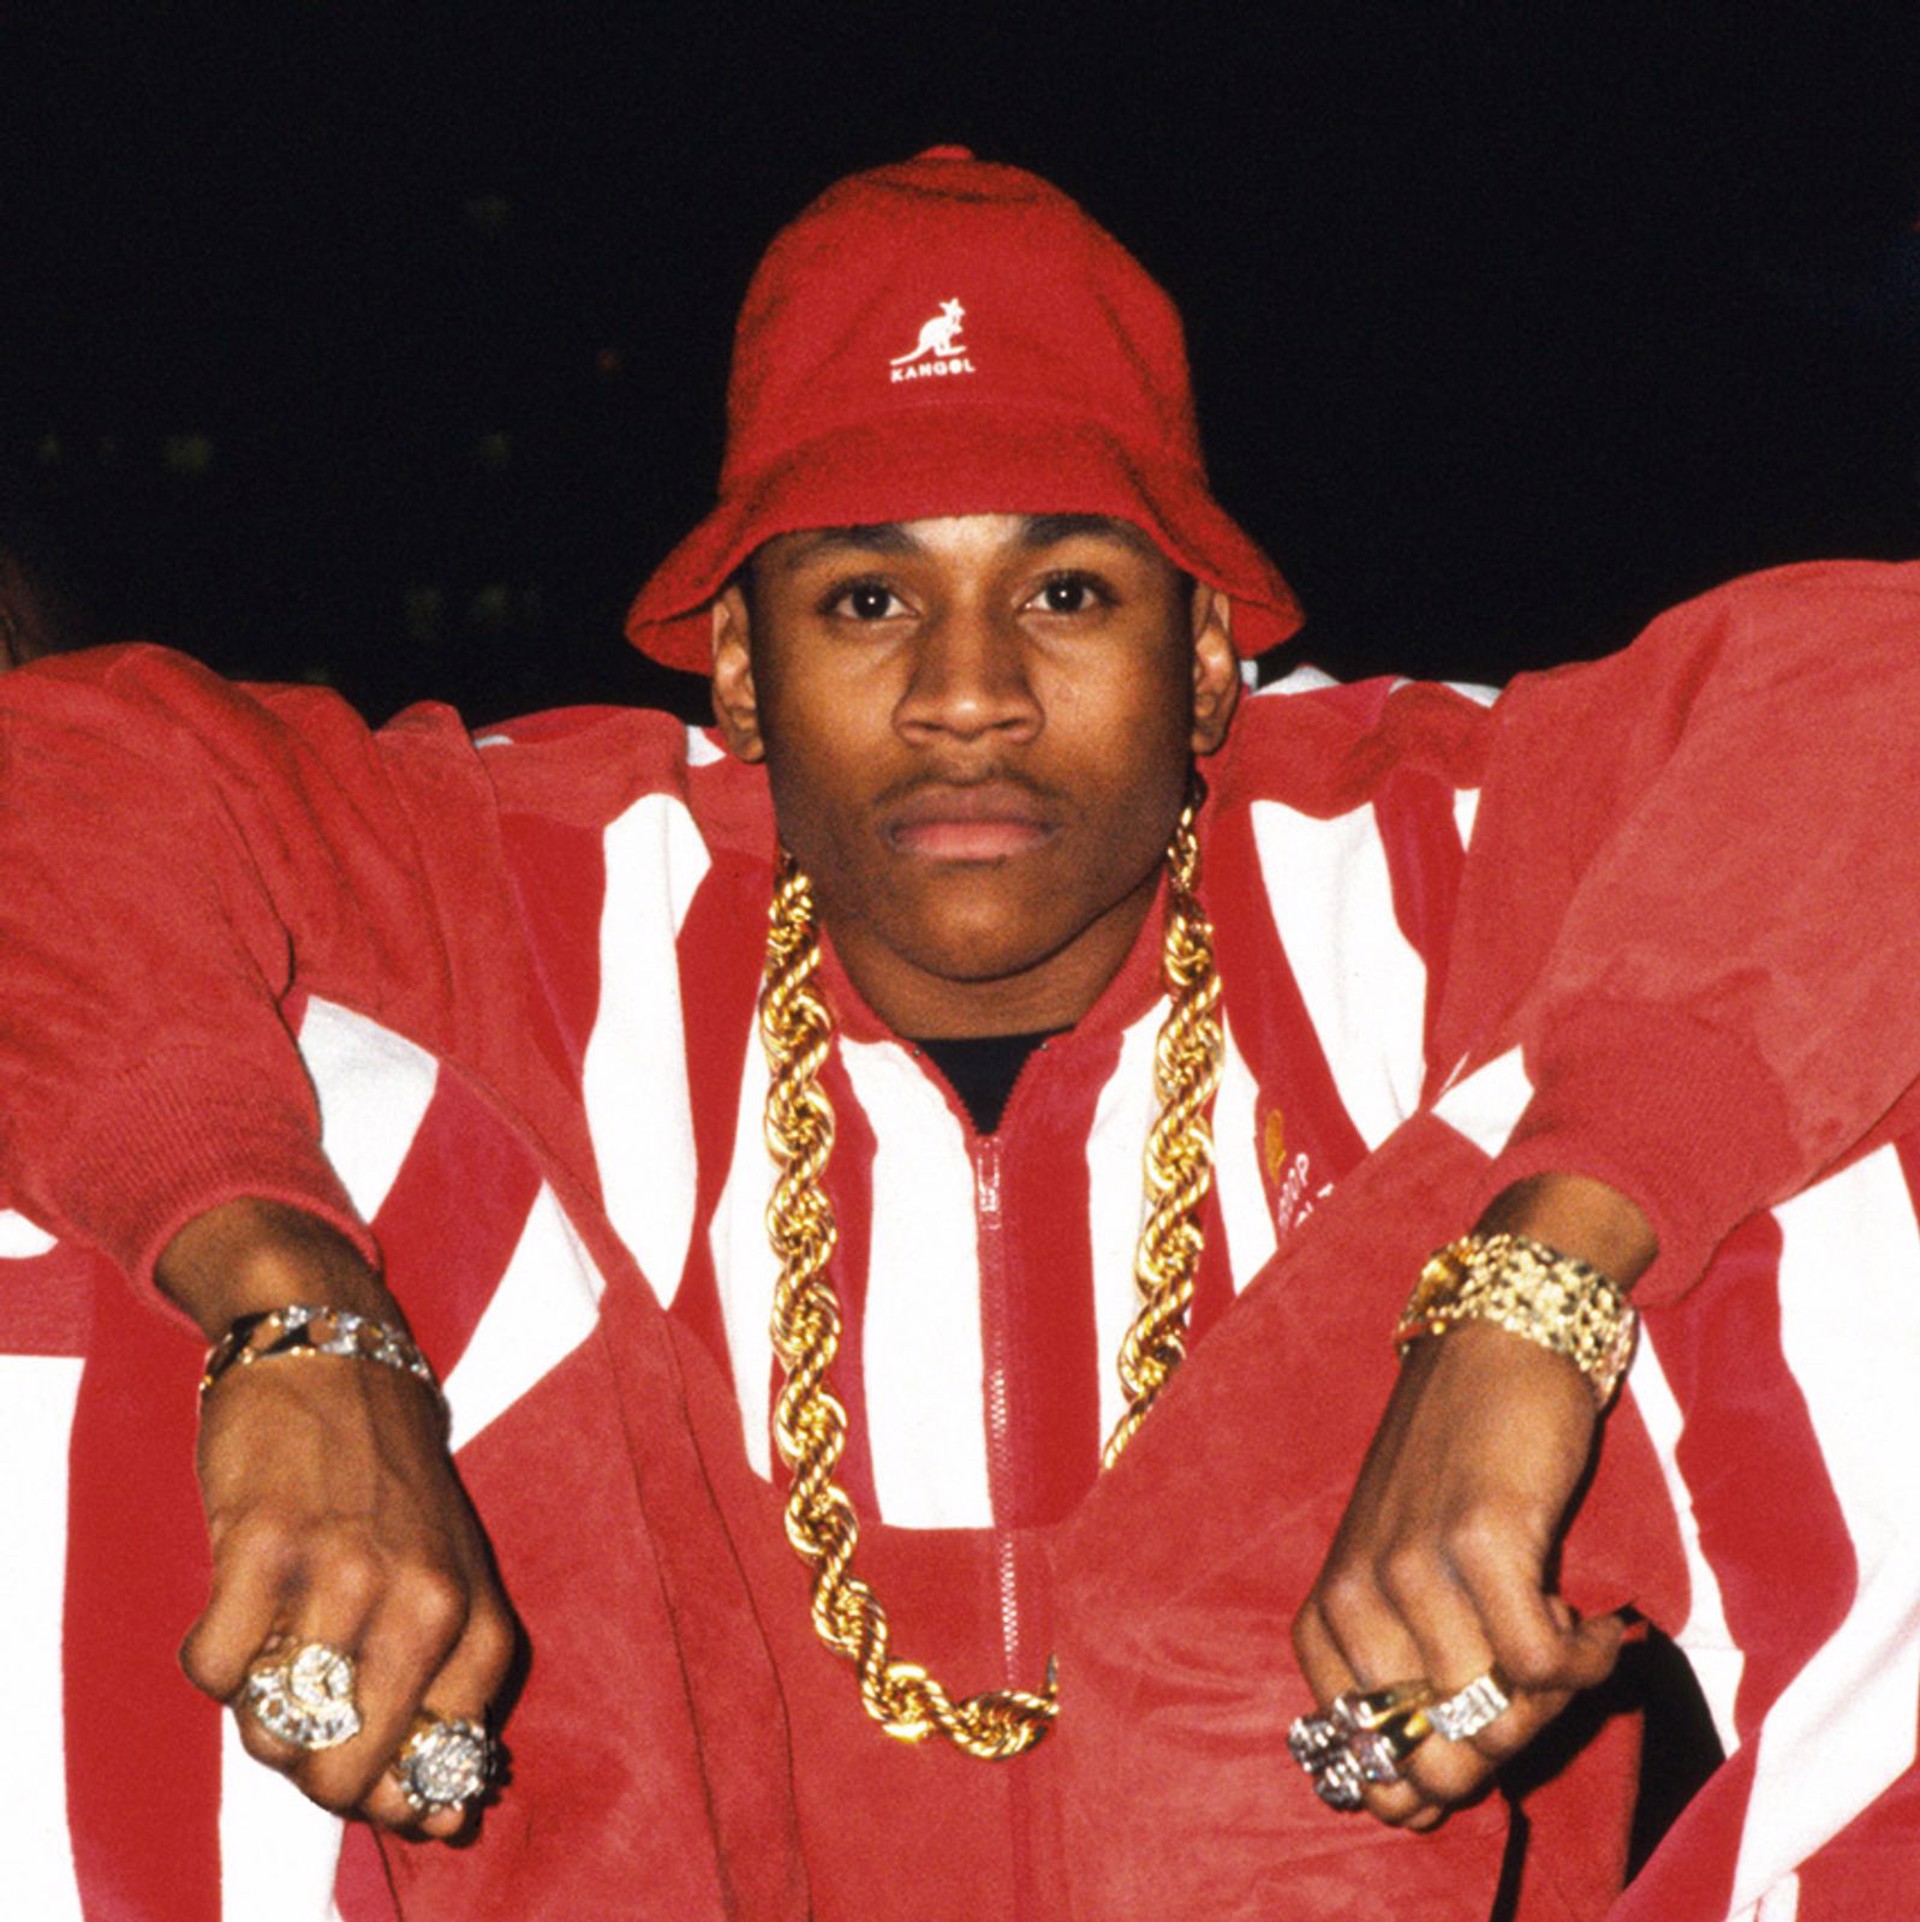 LL Cool J - Los Angeles 1988 - Fine Art Paper Edition (AP) by Ricky Powell